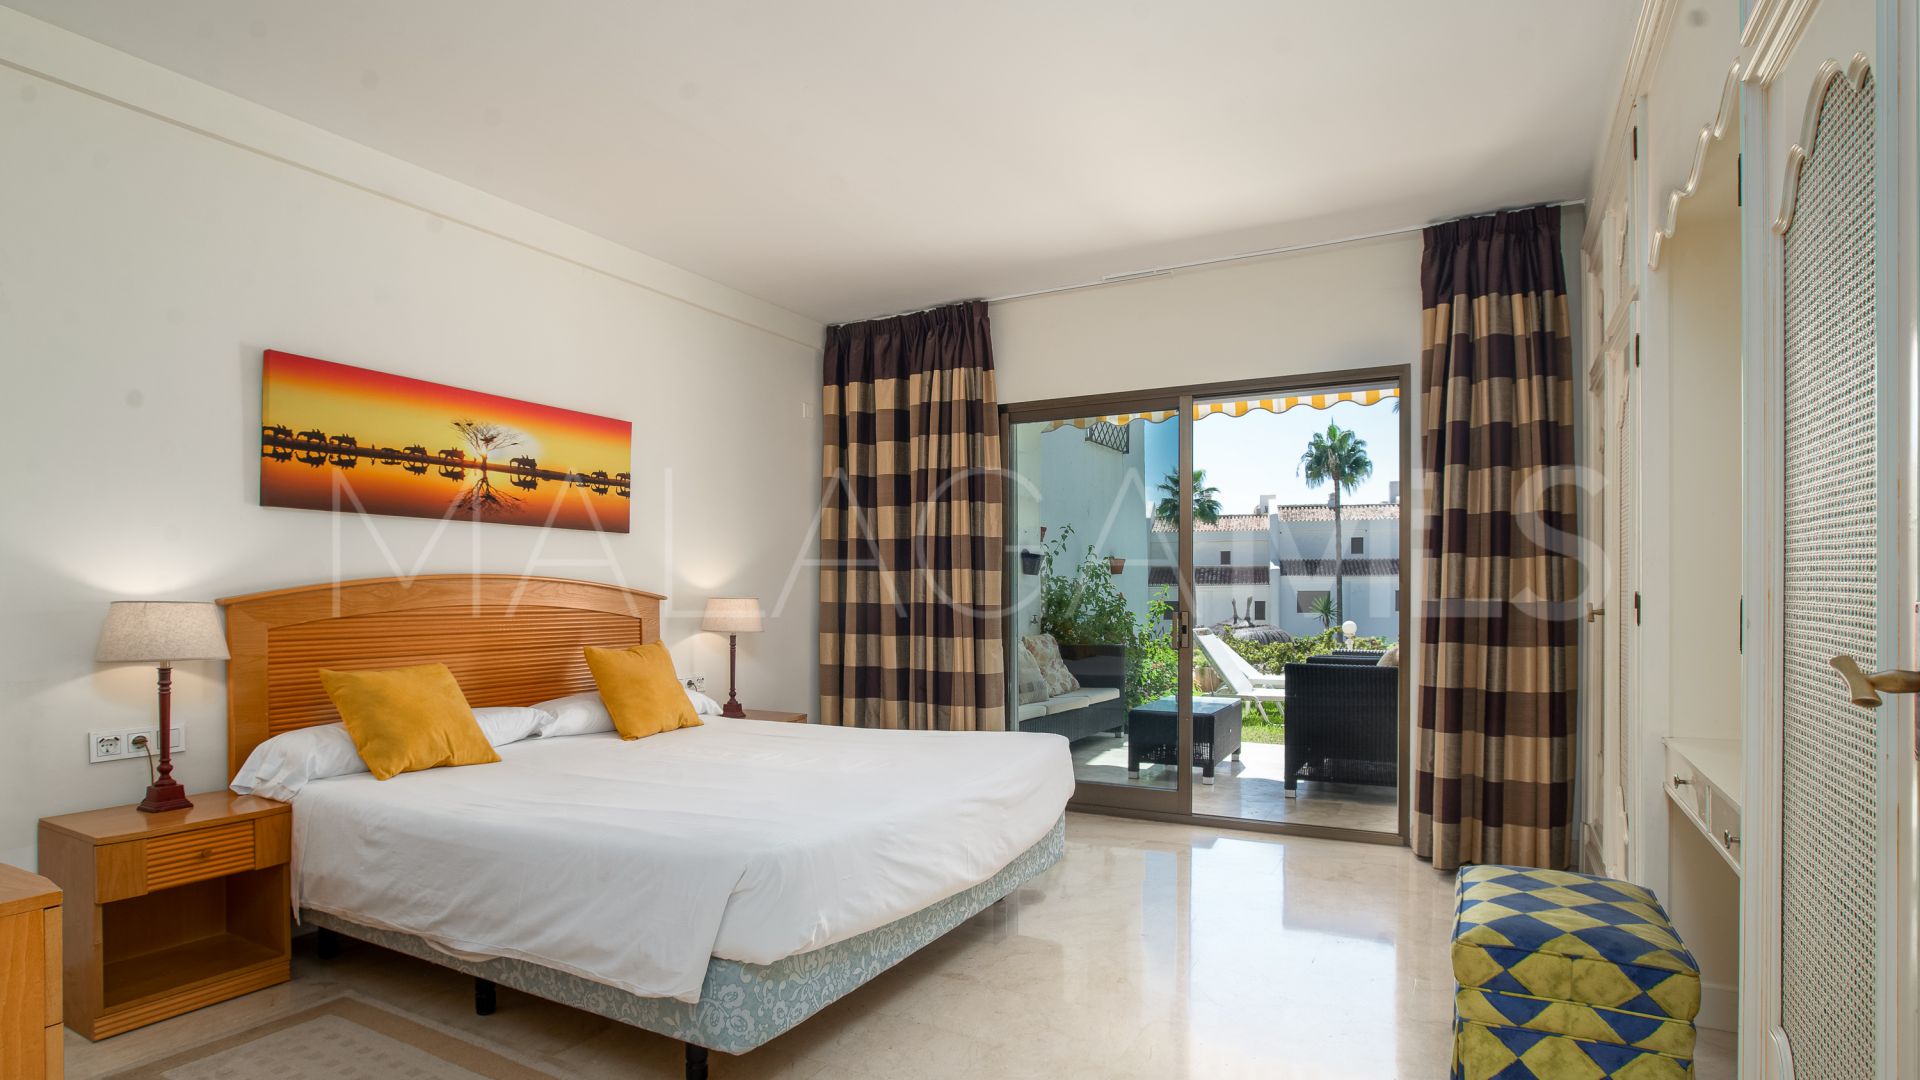 2 bedrooms ground floor apartment in Coral Beach for sale